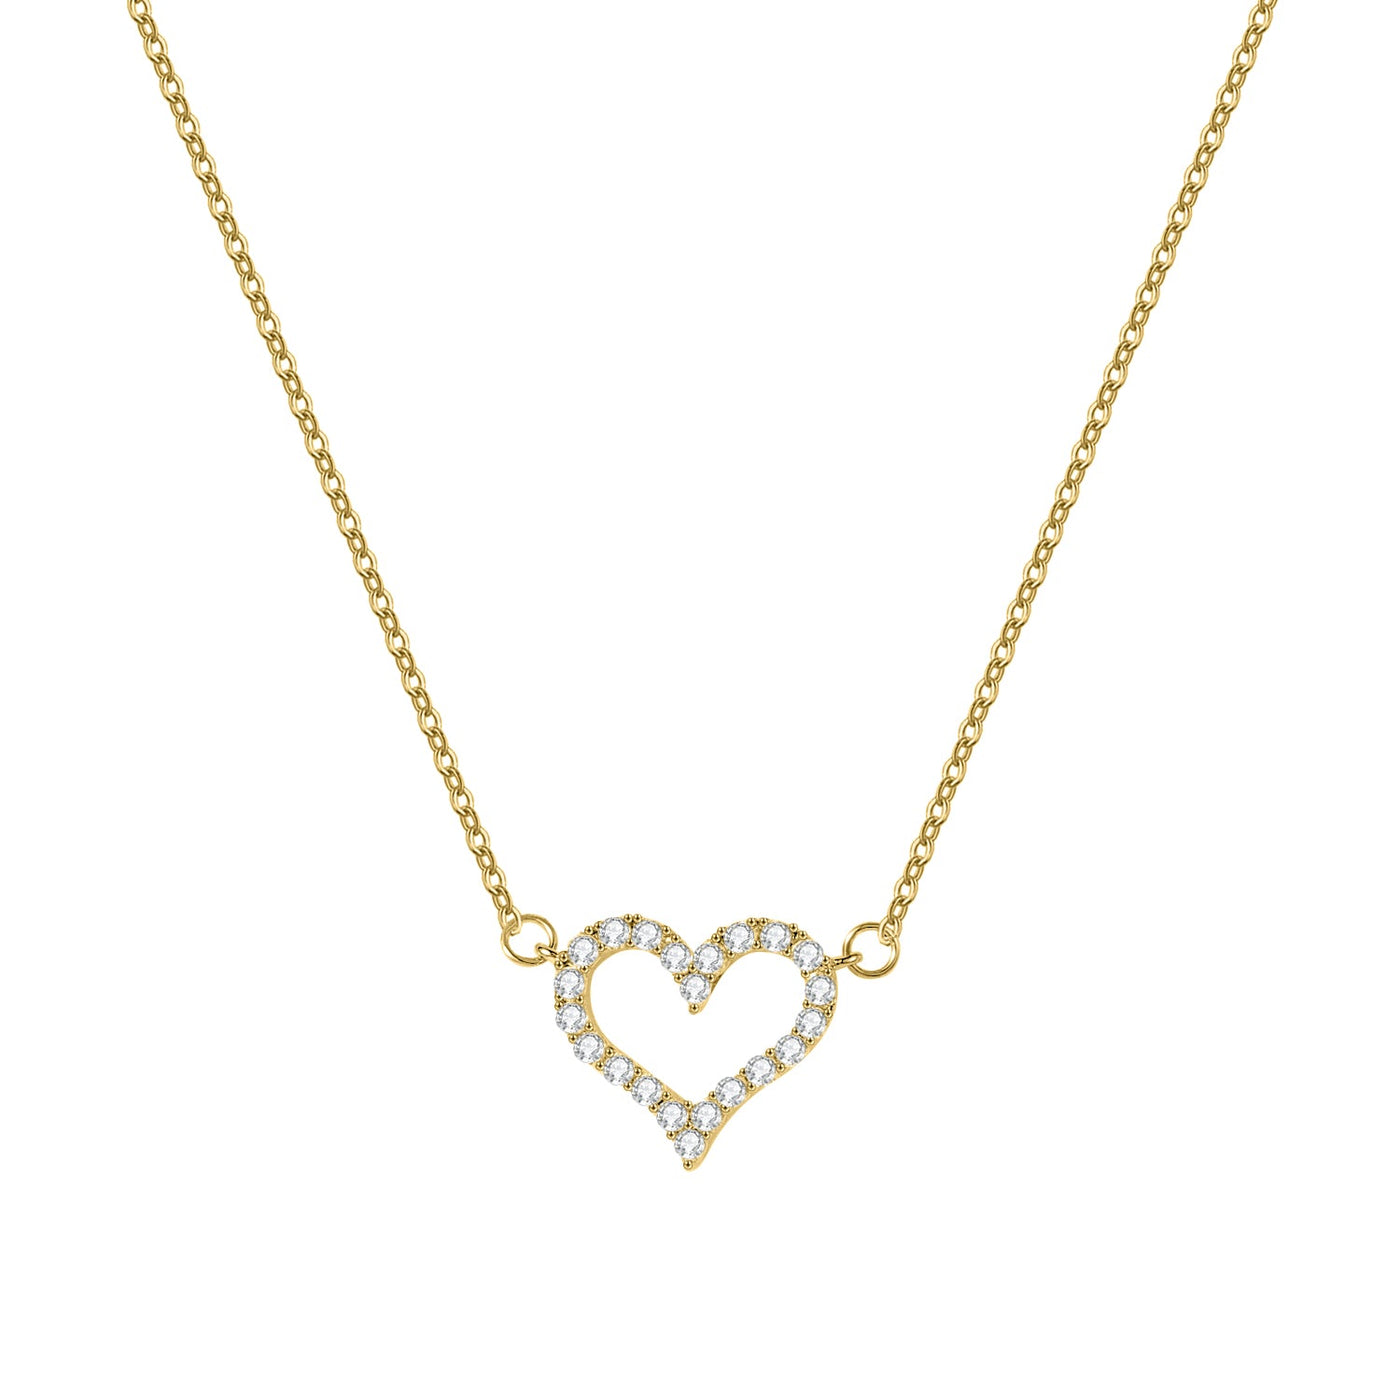 Gift for Daughter - Love Heart Necklace - HouseofLx-18K Yellow Gold